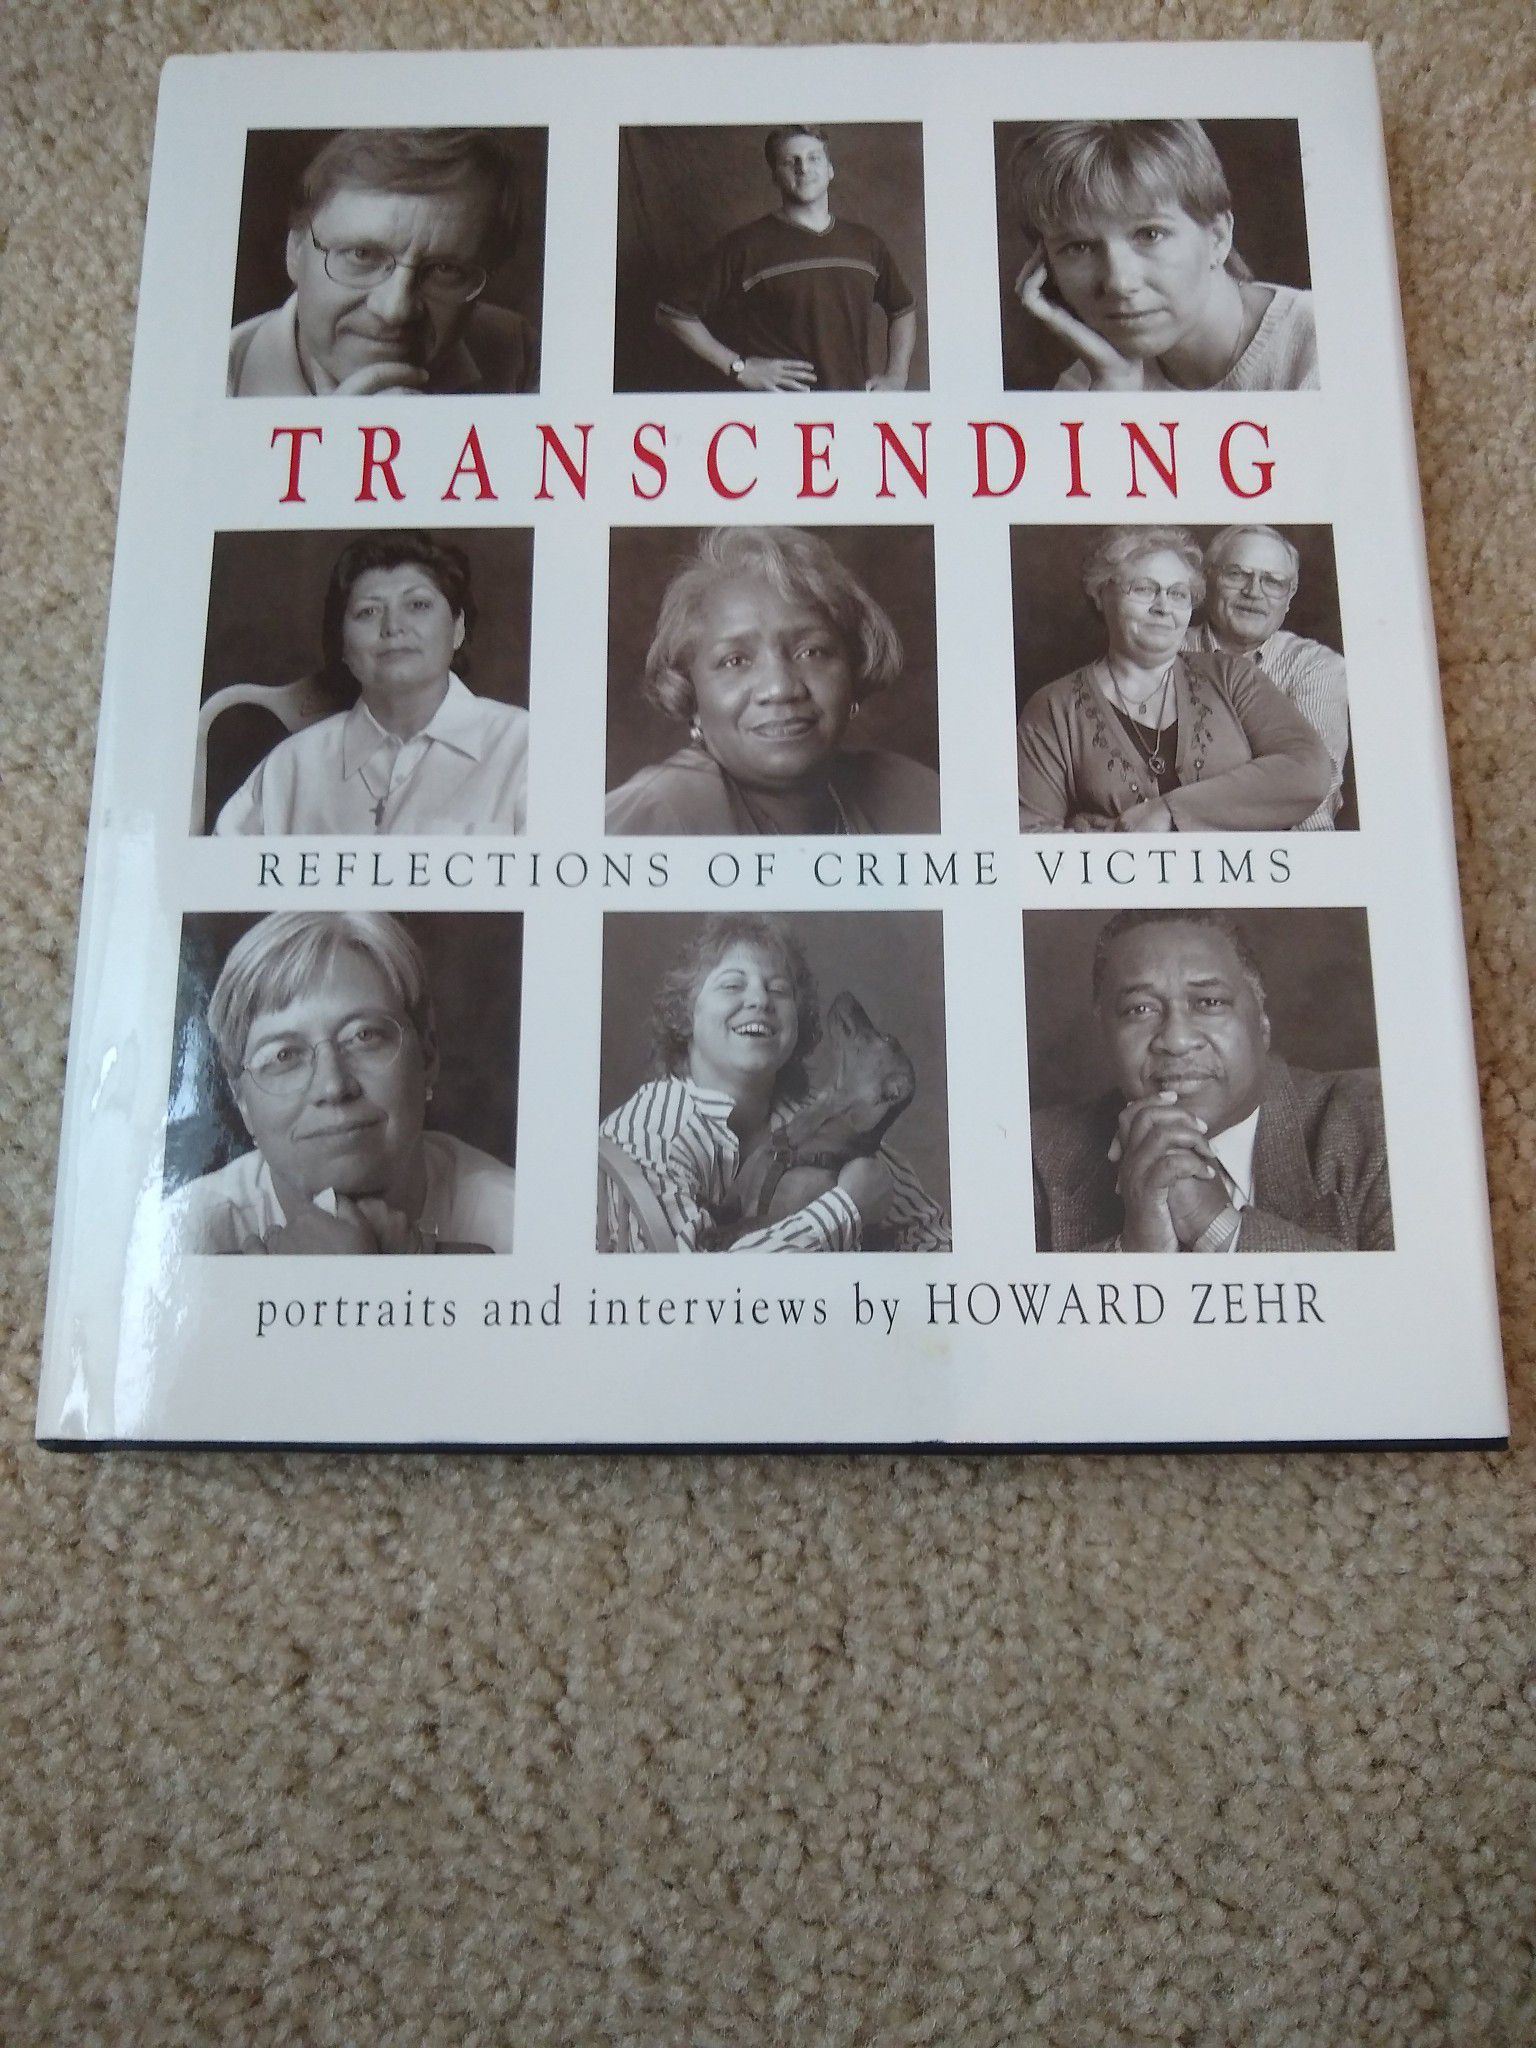 Transcending : Reflections of Crime Victims - Portraits and Interviews by Howar…. Condition is Brand New.